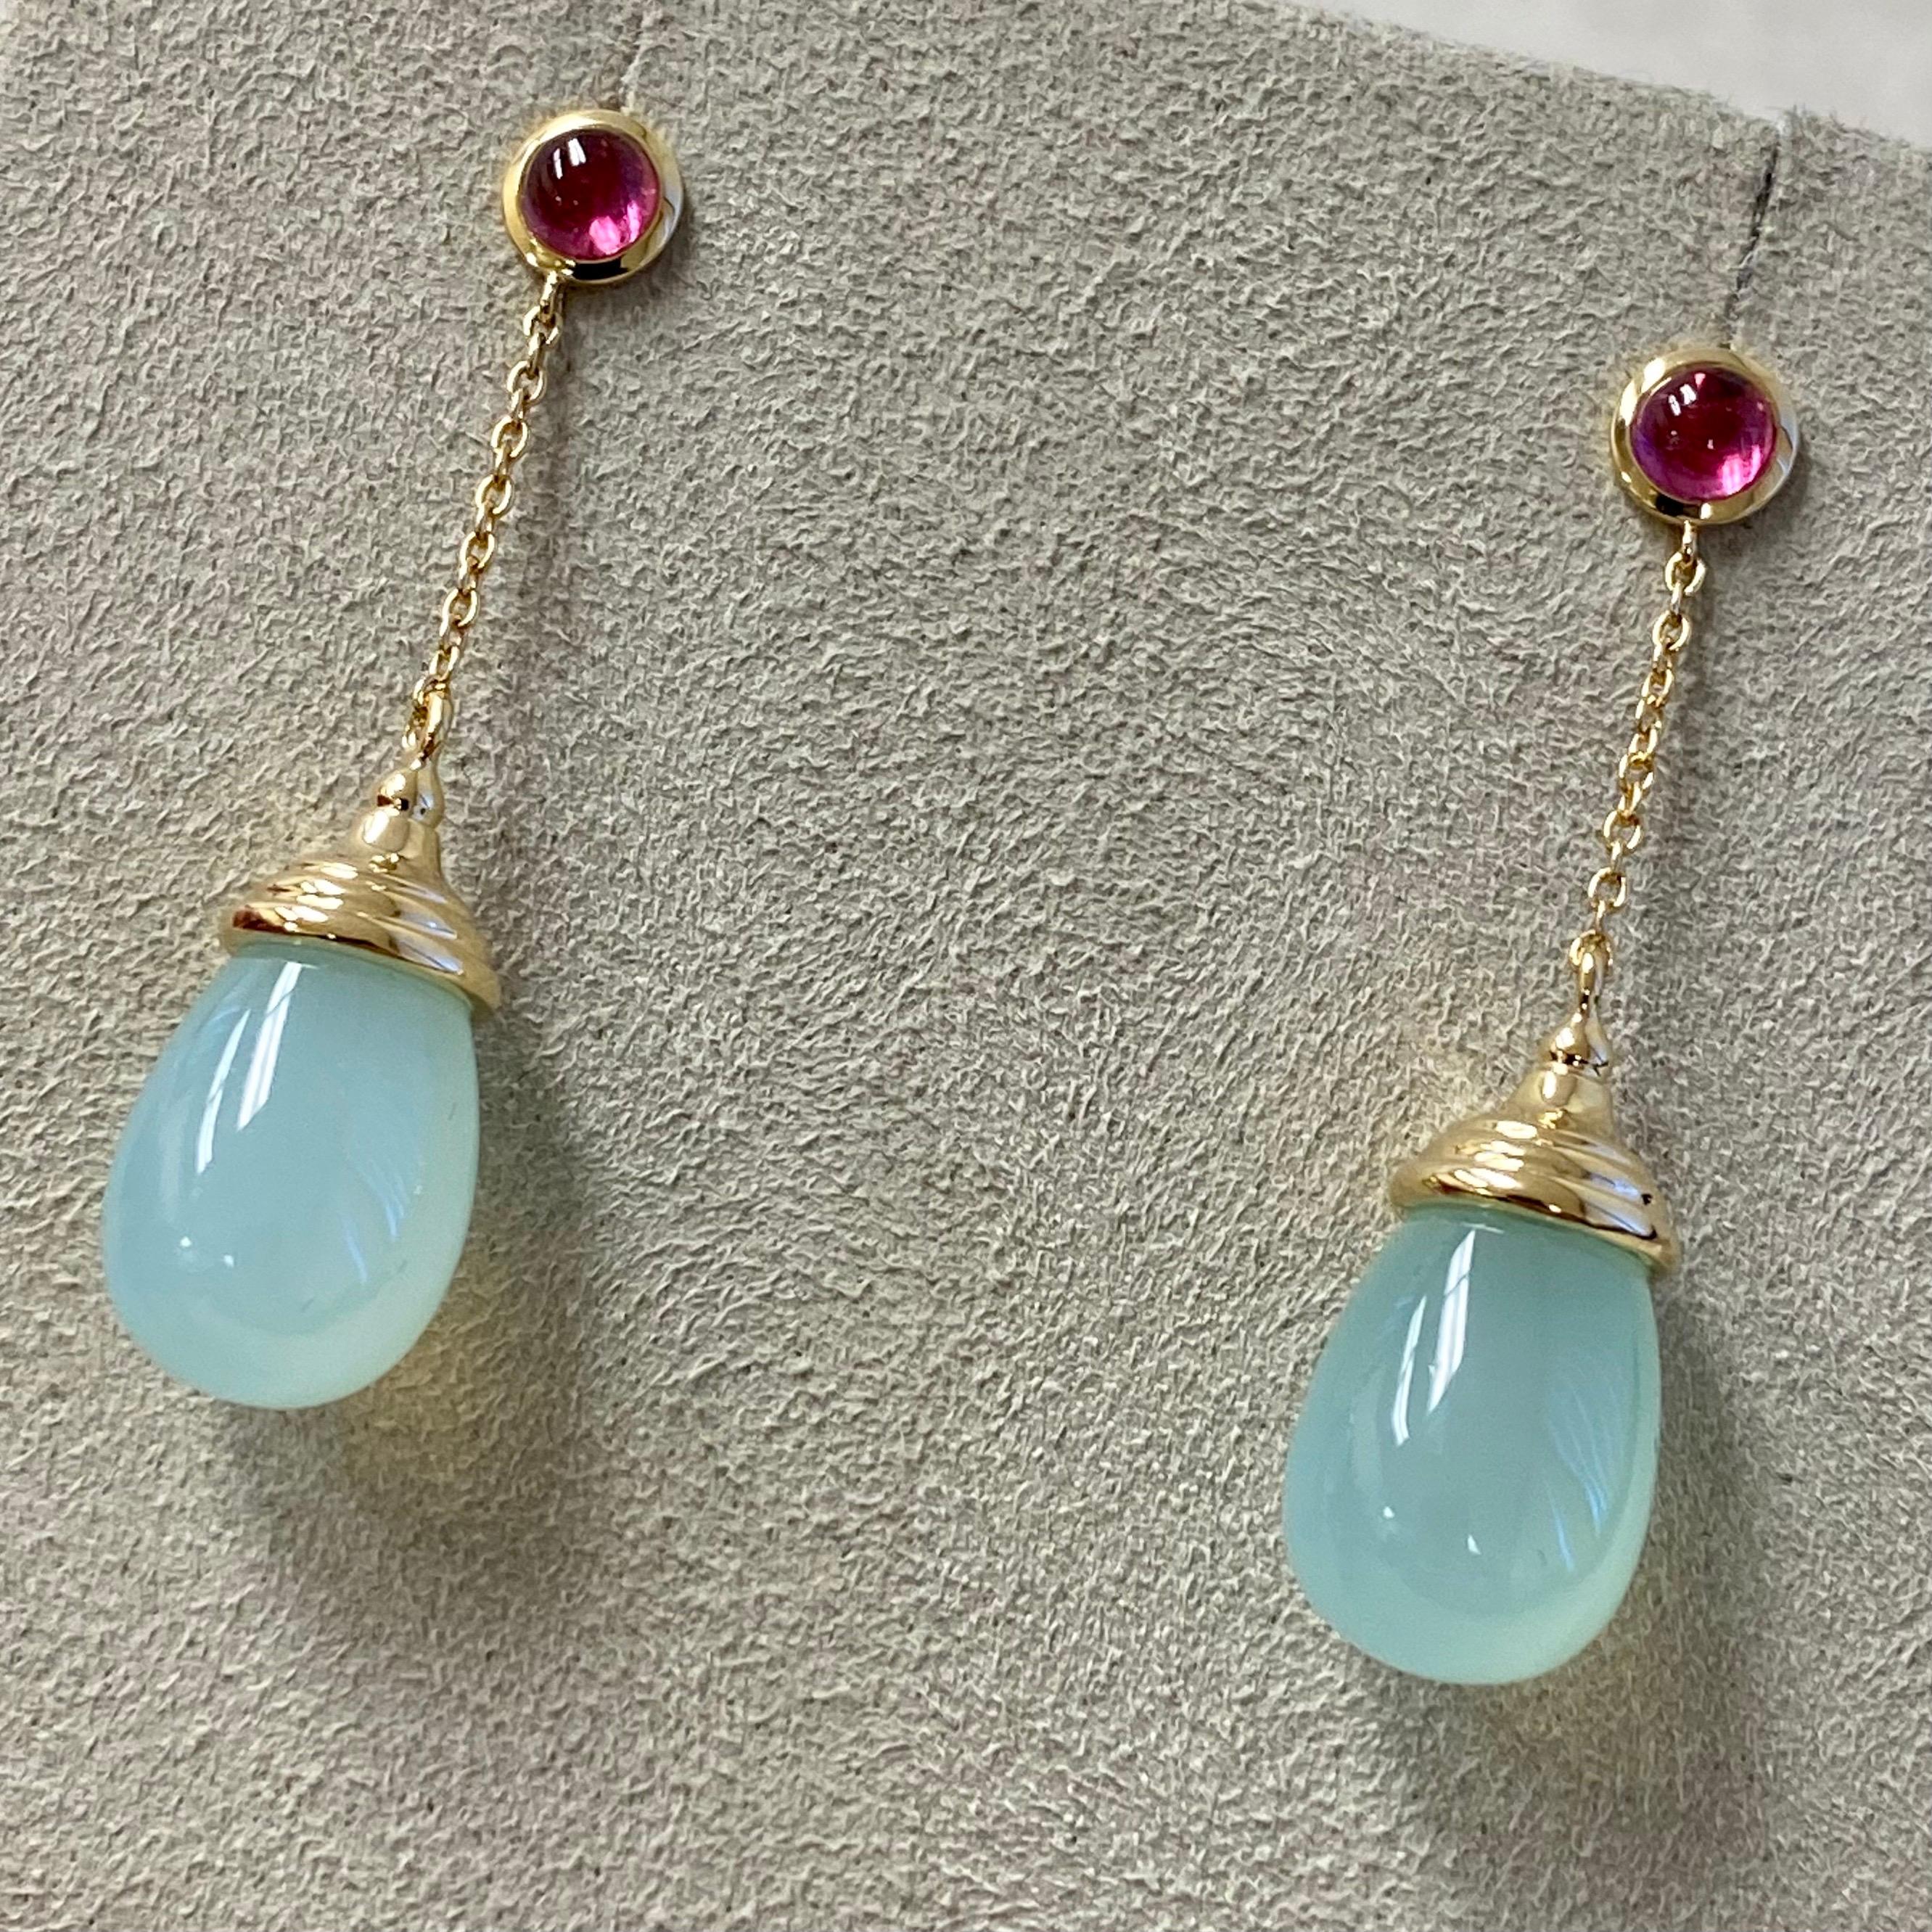 Created in 18 karat yellow gold
Sea Green Chalcedony Drops 20 carats approx.
Rubellite cabochons 0.50 carat approx.
18kyg butterfly backs

Crafted from 18 karat yellow gold, these earrings feature Sea Green Chalcedony Drops of approx. 20 carats and